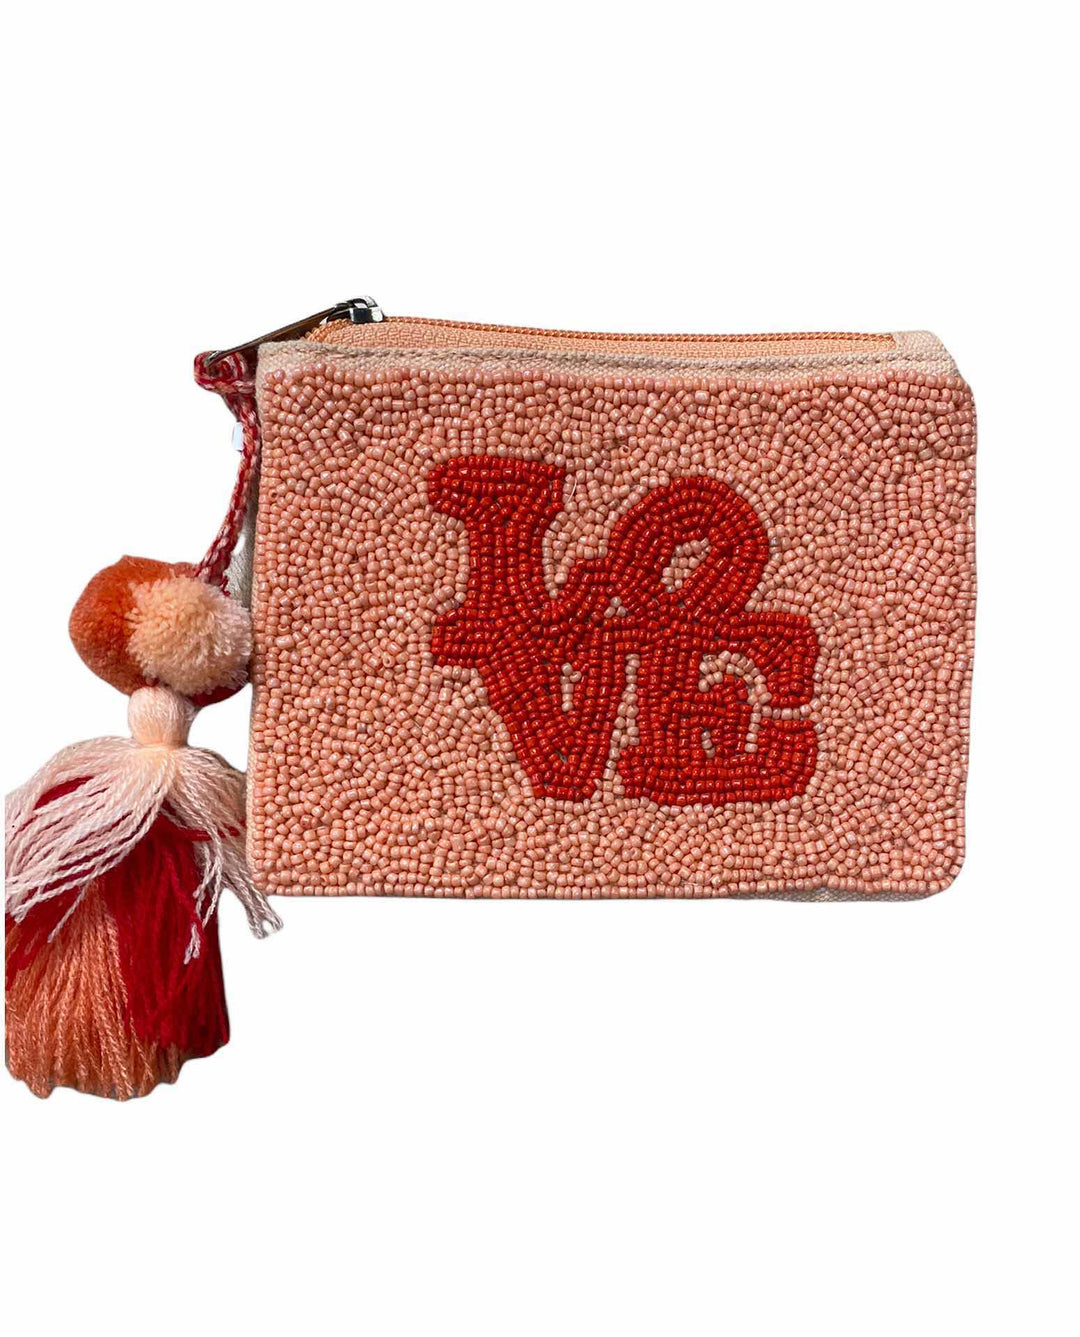 LOVE COIN PURSE - Kingfisher Road - Online Boutique